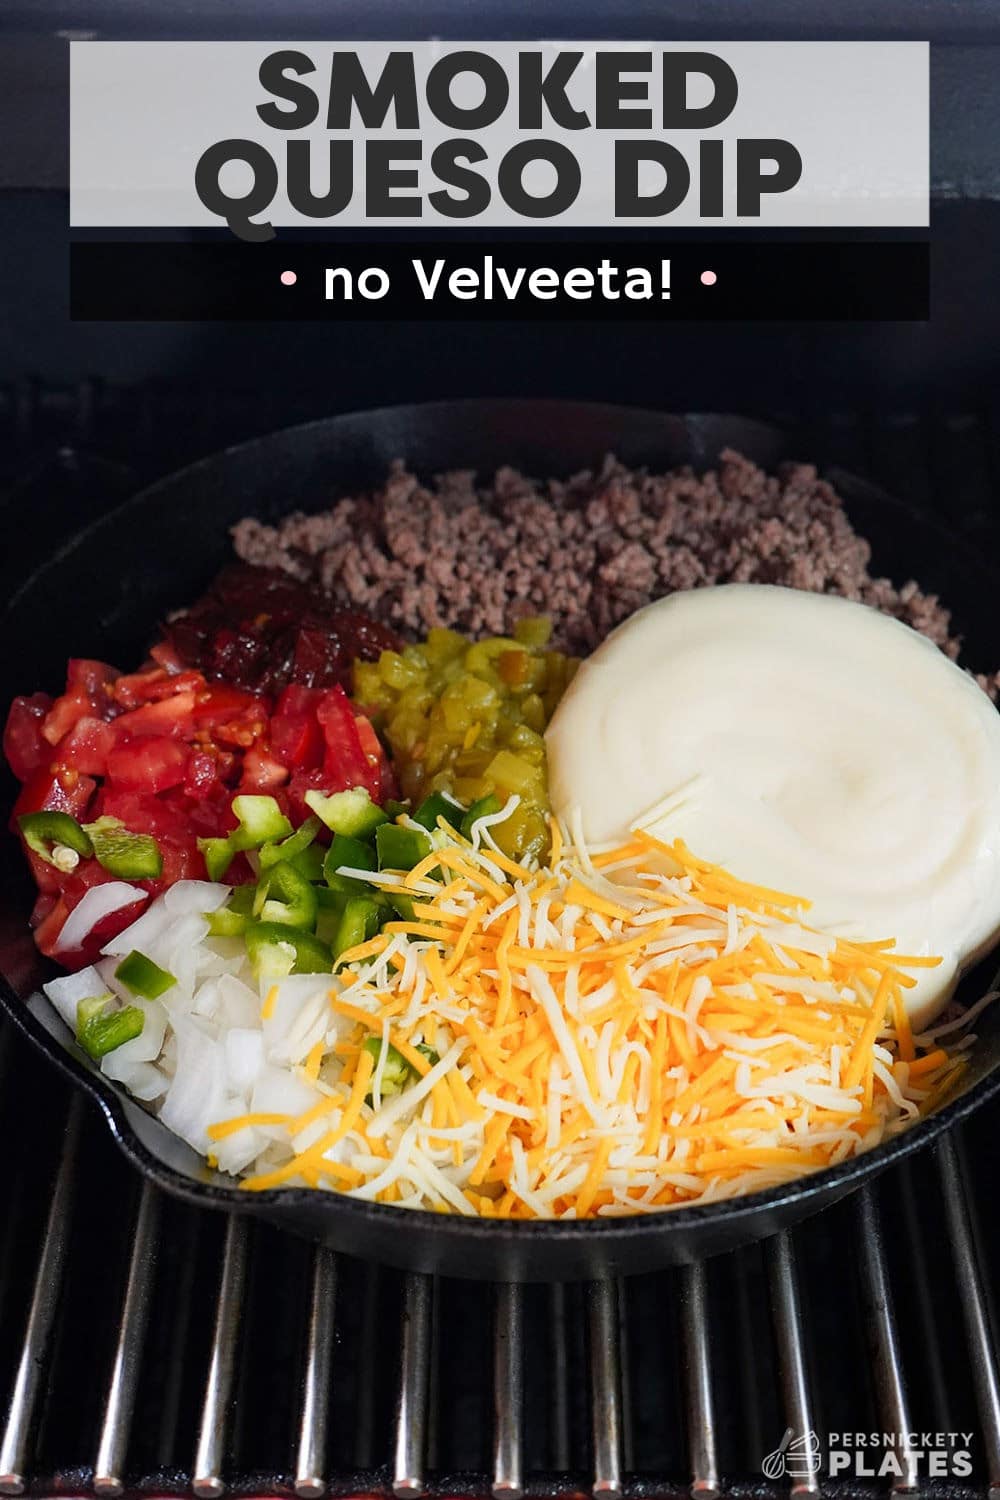 This smoked queso recipe with beef is made with two kinds of freshly grated real cheese and no Velveeta! Loads of ground beef, tomatoes, onions, and three kinds of peppers for heat are cooked low and slow in a flavor-infused smoker giving this ultimate queso dip tons of Mexican-inspired flavor. | www.persnicketyplates.com